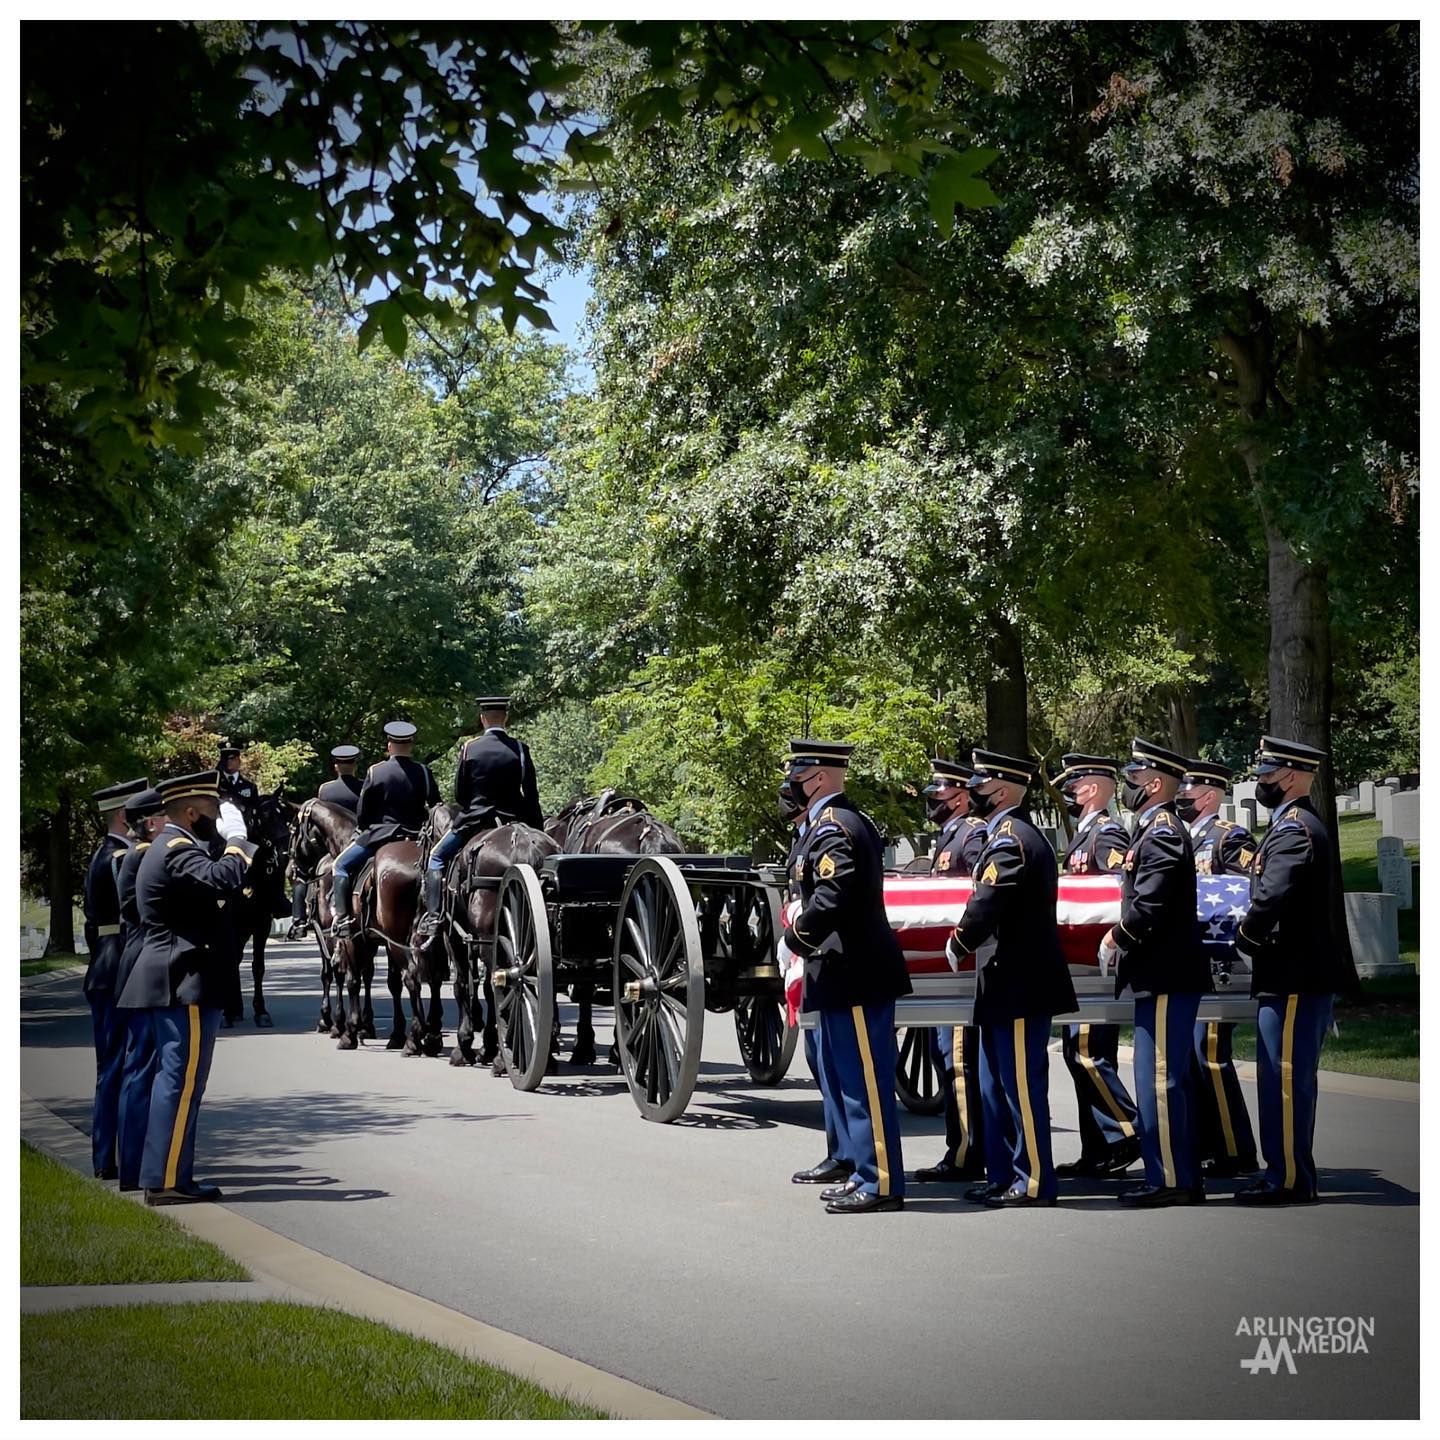 US Army Infantry soldiers from The Old Guard carry the honored remains of a fallen veteran during a full honors military service in Arlington National Cemetery. 

Full honors services with military escort are reserved for those military members who attained the grade of E-9, CW-4 and CW-5, and O-4 and above, or service members regardless of rank who receive the Medal of Honor, who were prisoners of war (POWs) or who were killed in action. 

Captured by our @arlingtonmedia team.